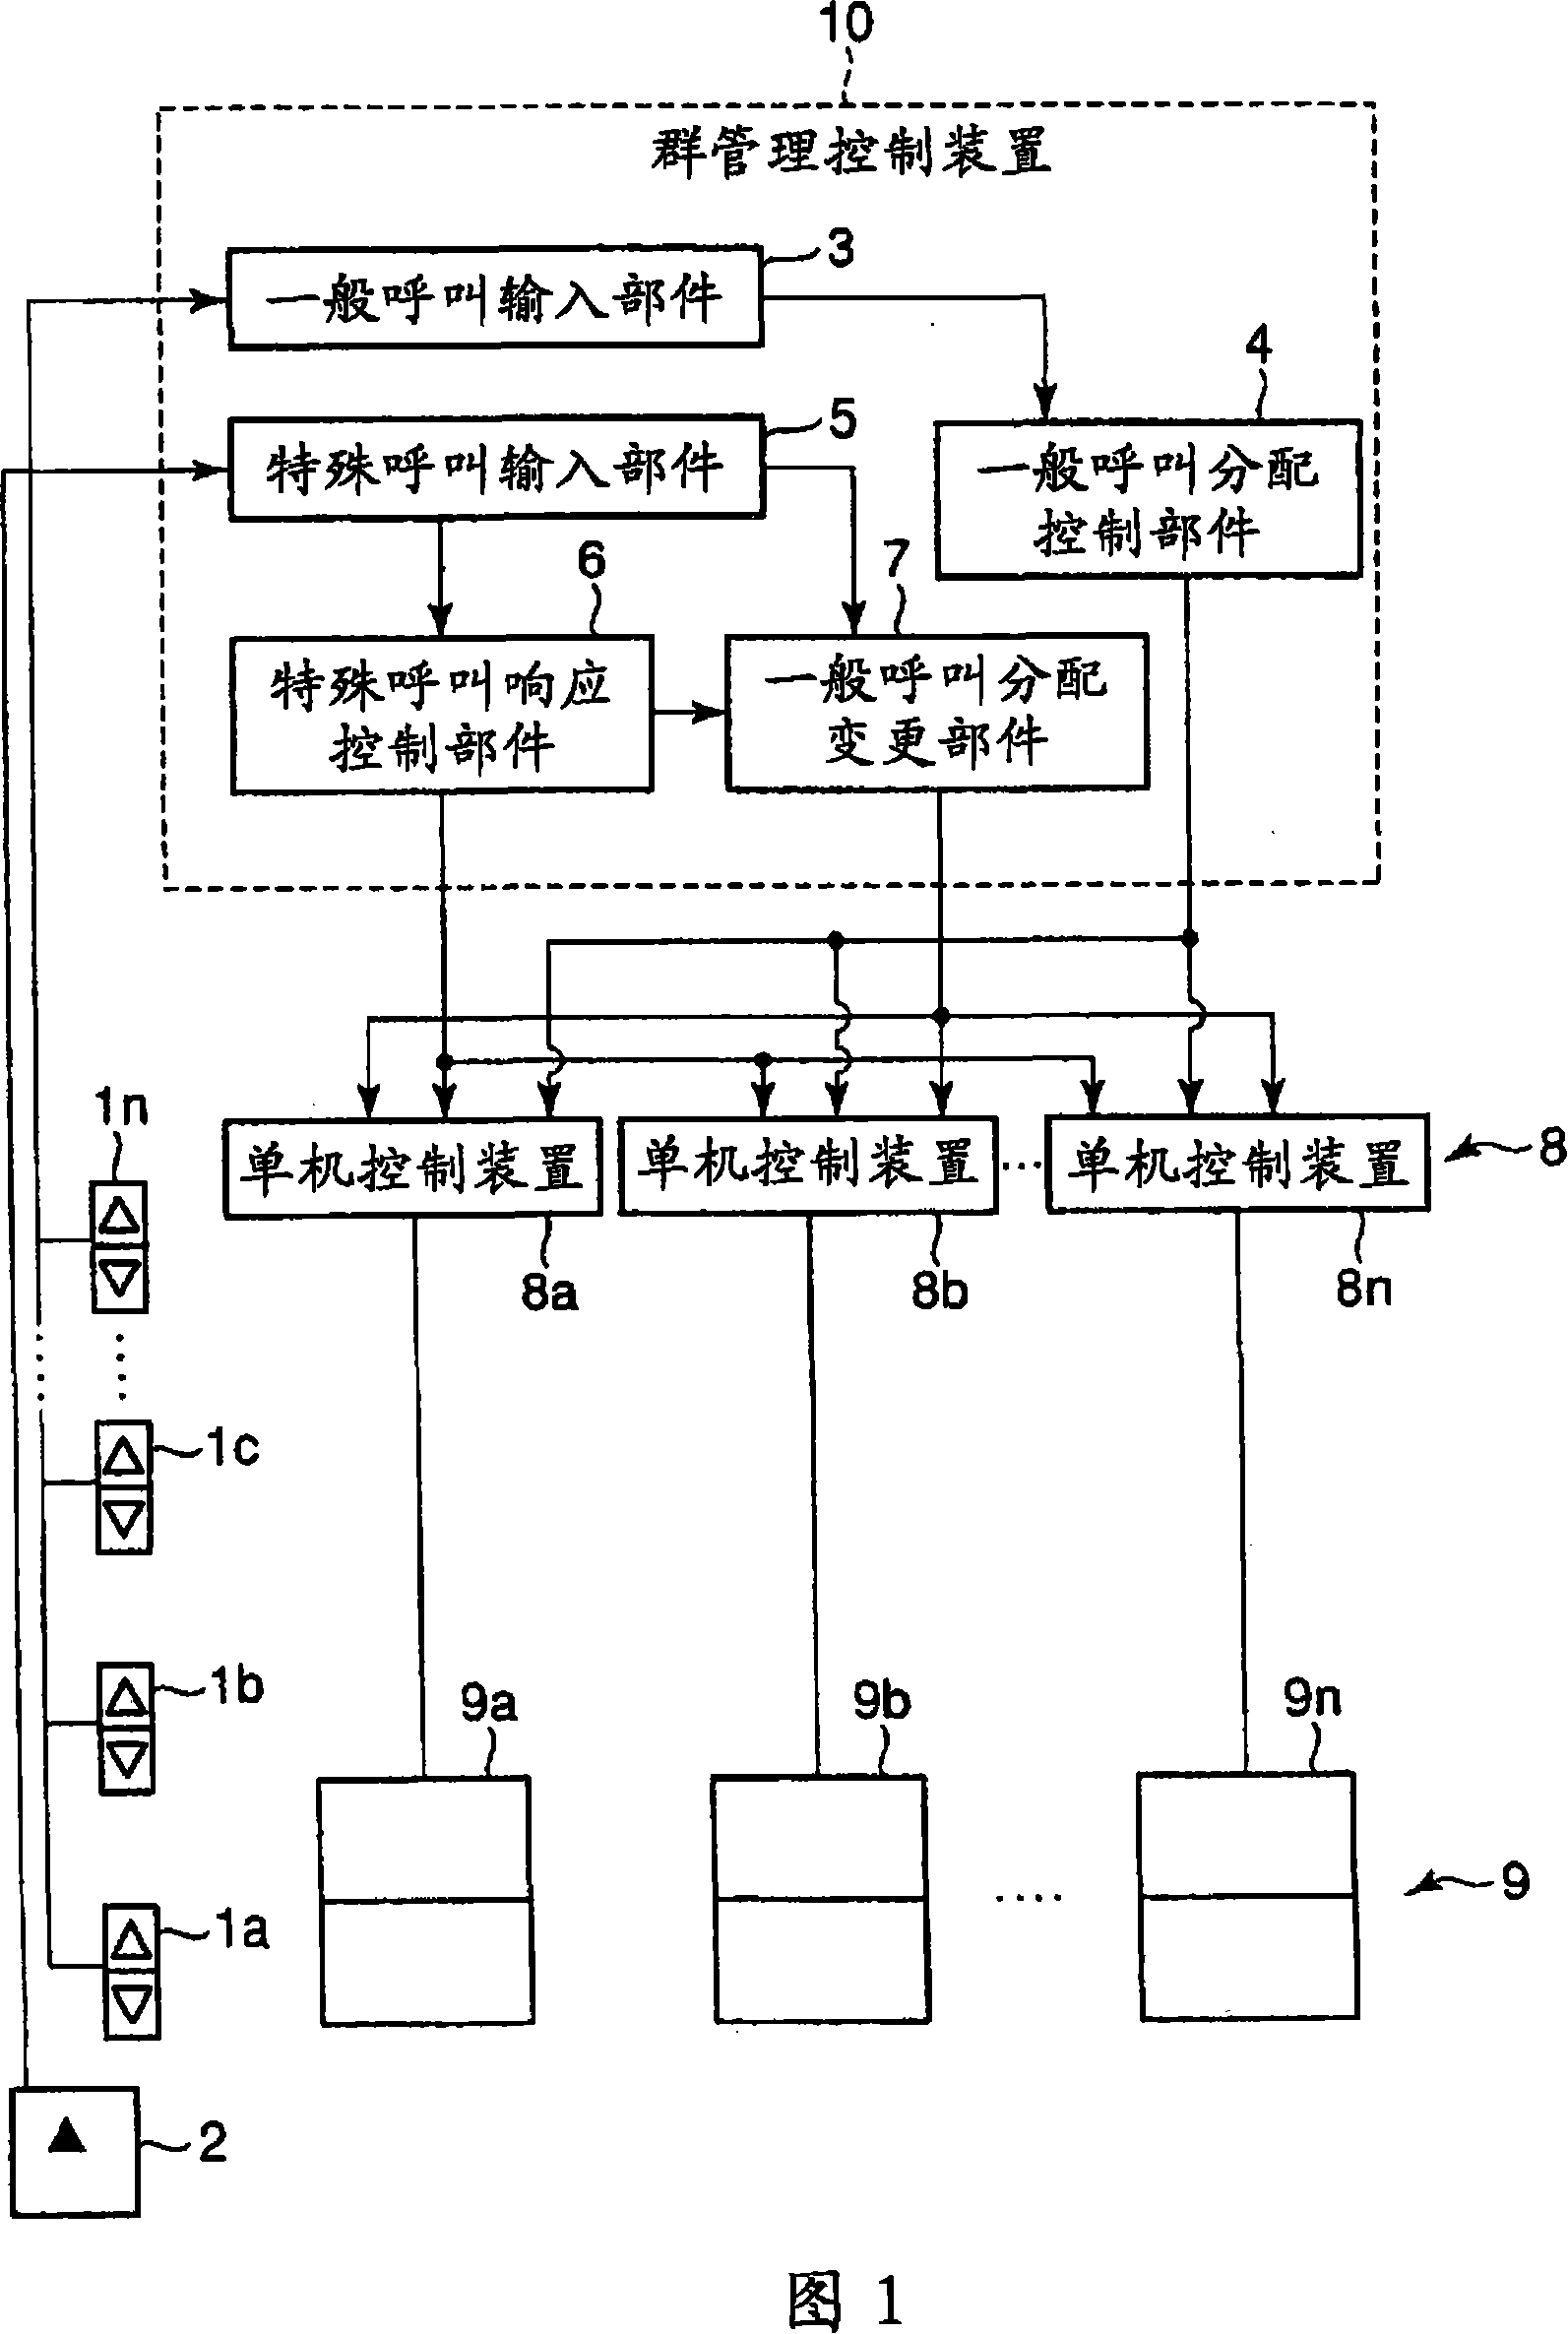 Elevator group management control device